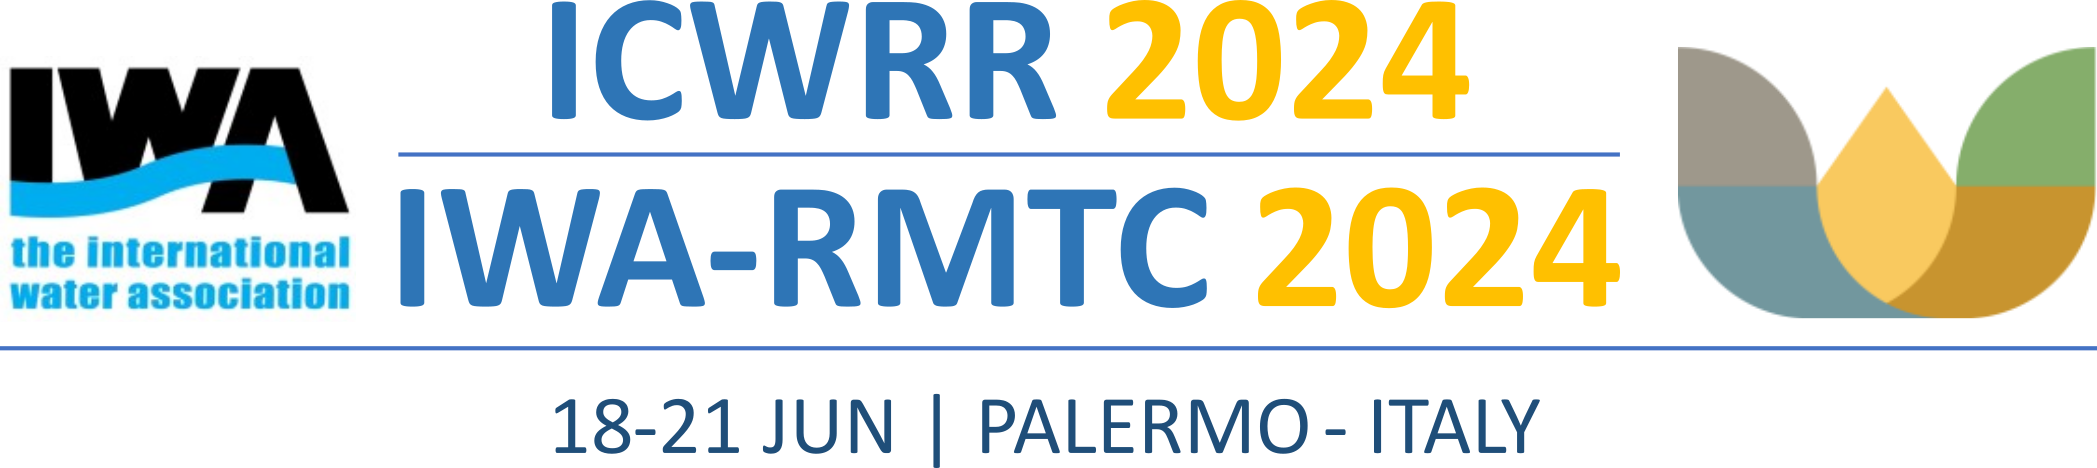 ICWRR 2024 | 18-21 June 2024 - Palermo, ITALY